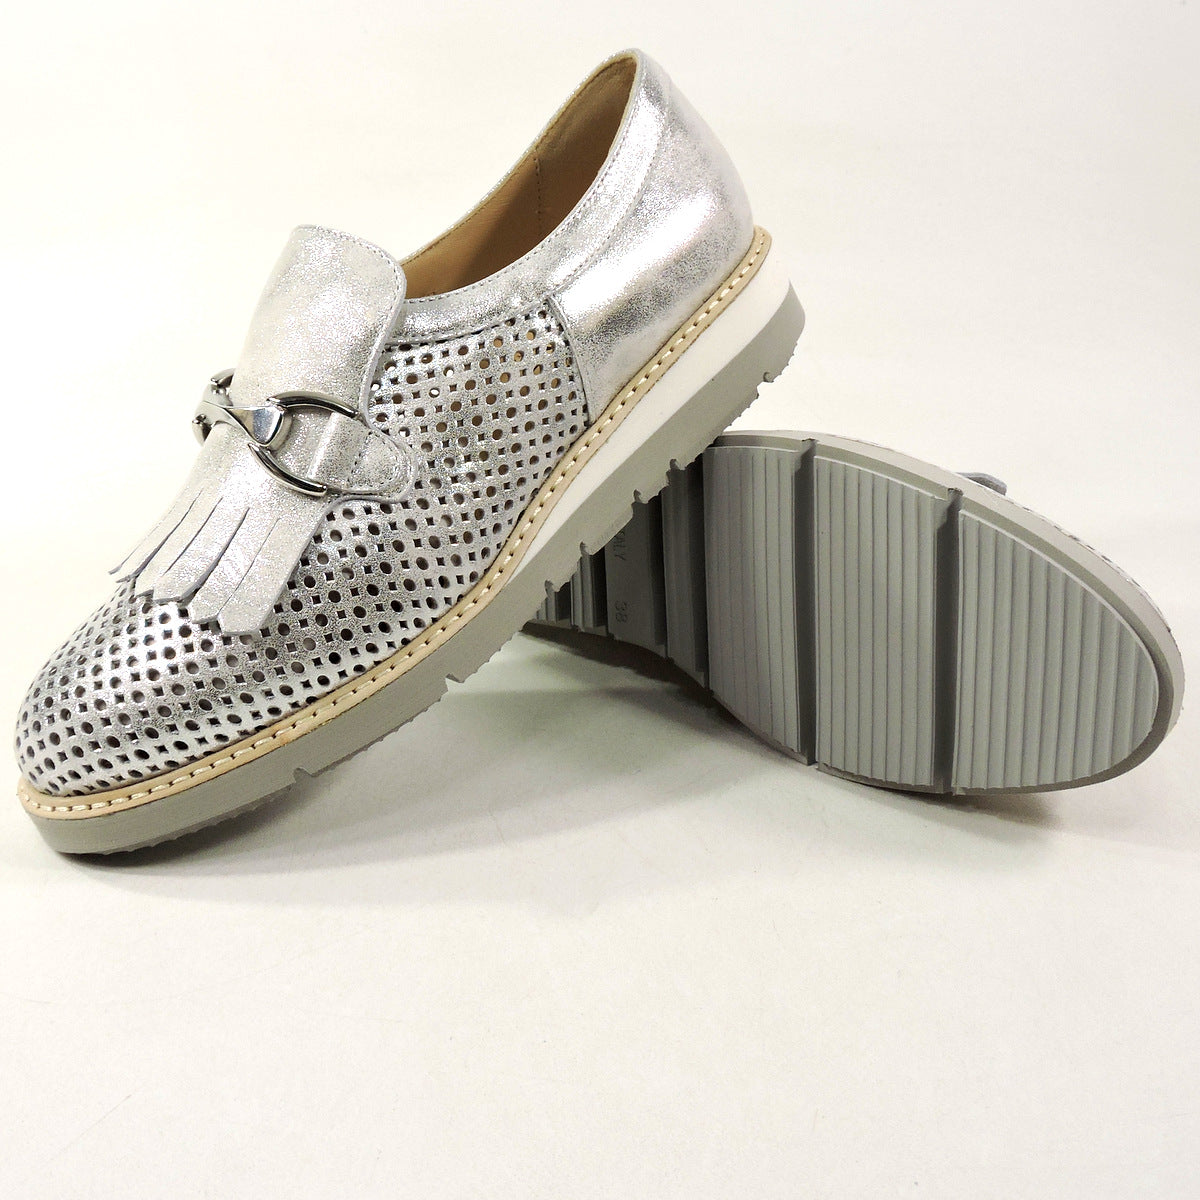 DONNA SOFT 🇮🇹WOMEN'S SILVER SOFT LEATHER COMFORT SUMMER LOAFERS